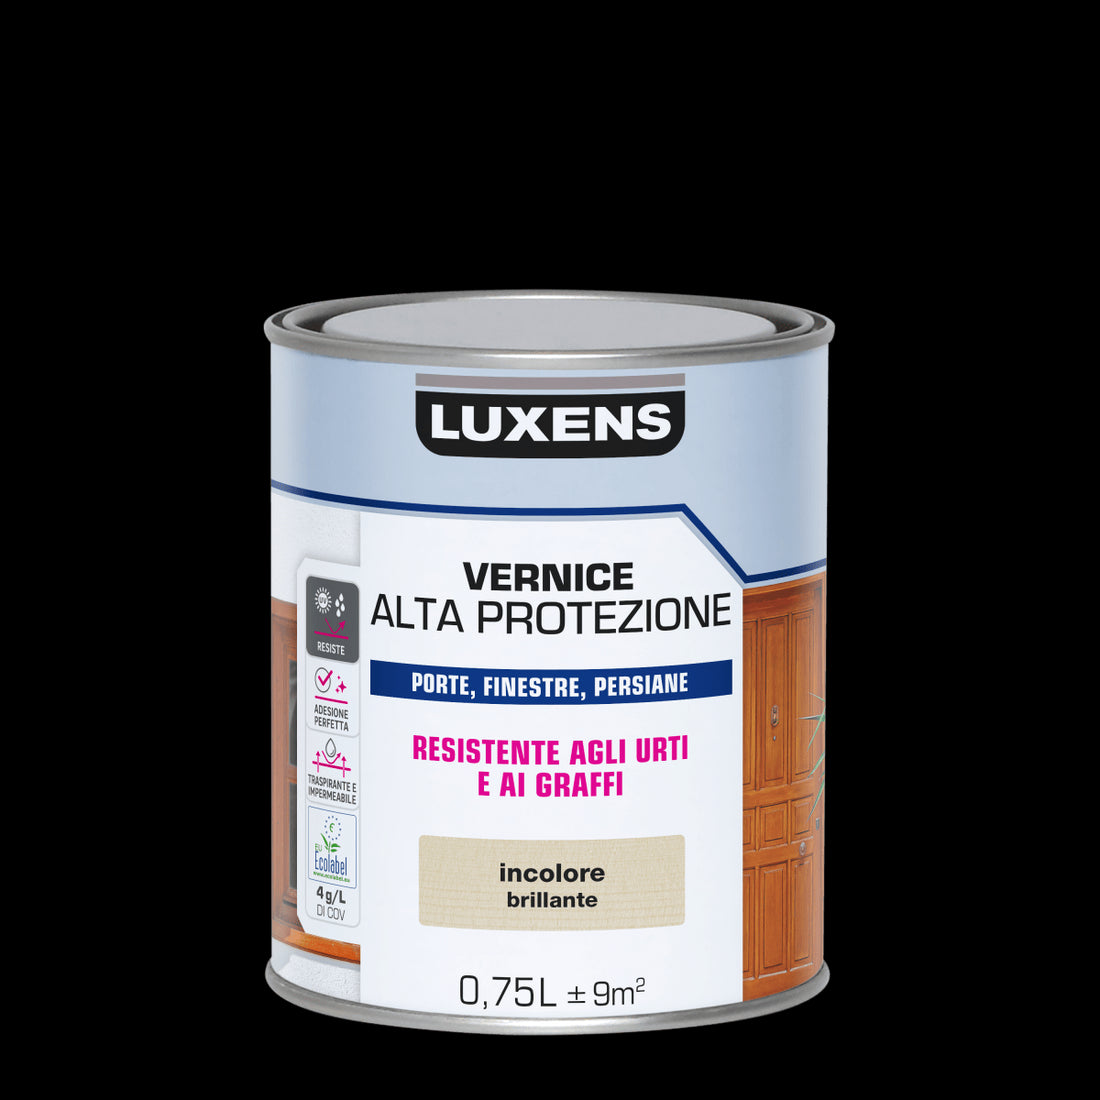 LUXENS HIGH-PROTECTION COLOURLESS HIGH-GLOSS WATER-BASED WOOD VARNISH 750 ML